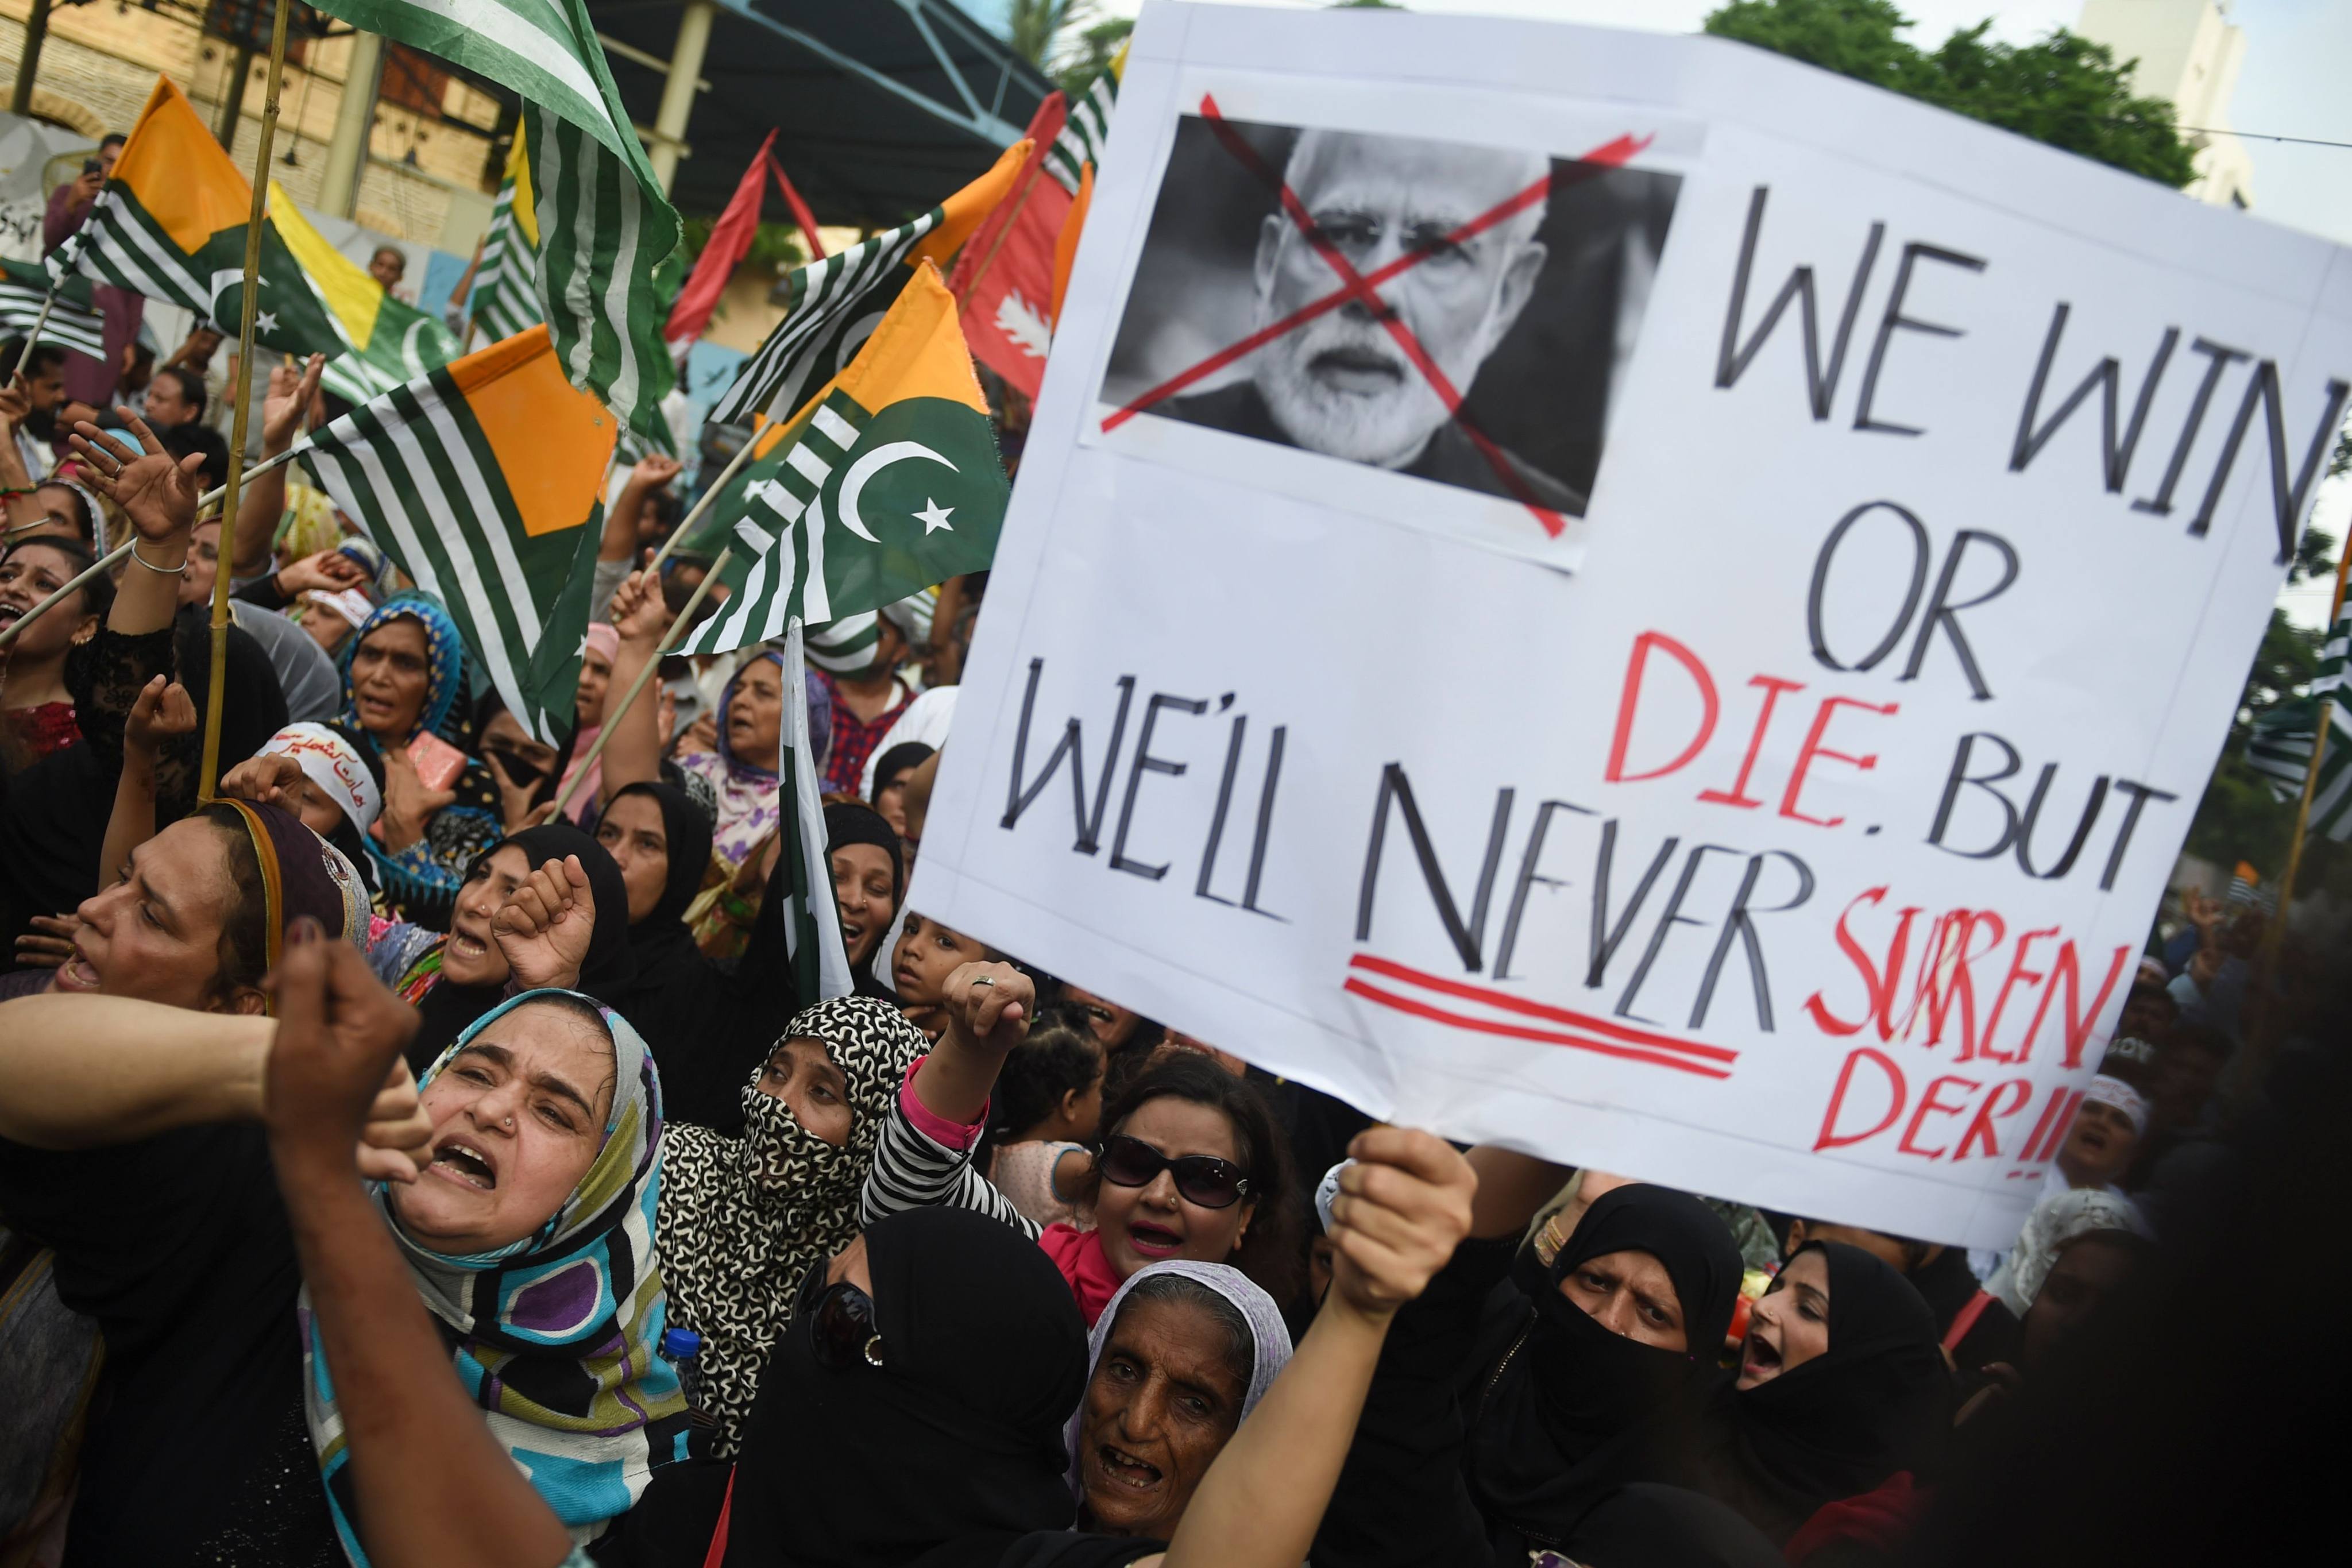 Kashmiri women march during an anti-India protest rally in Karachi in August 2019. Photo: AFP